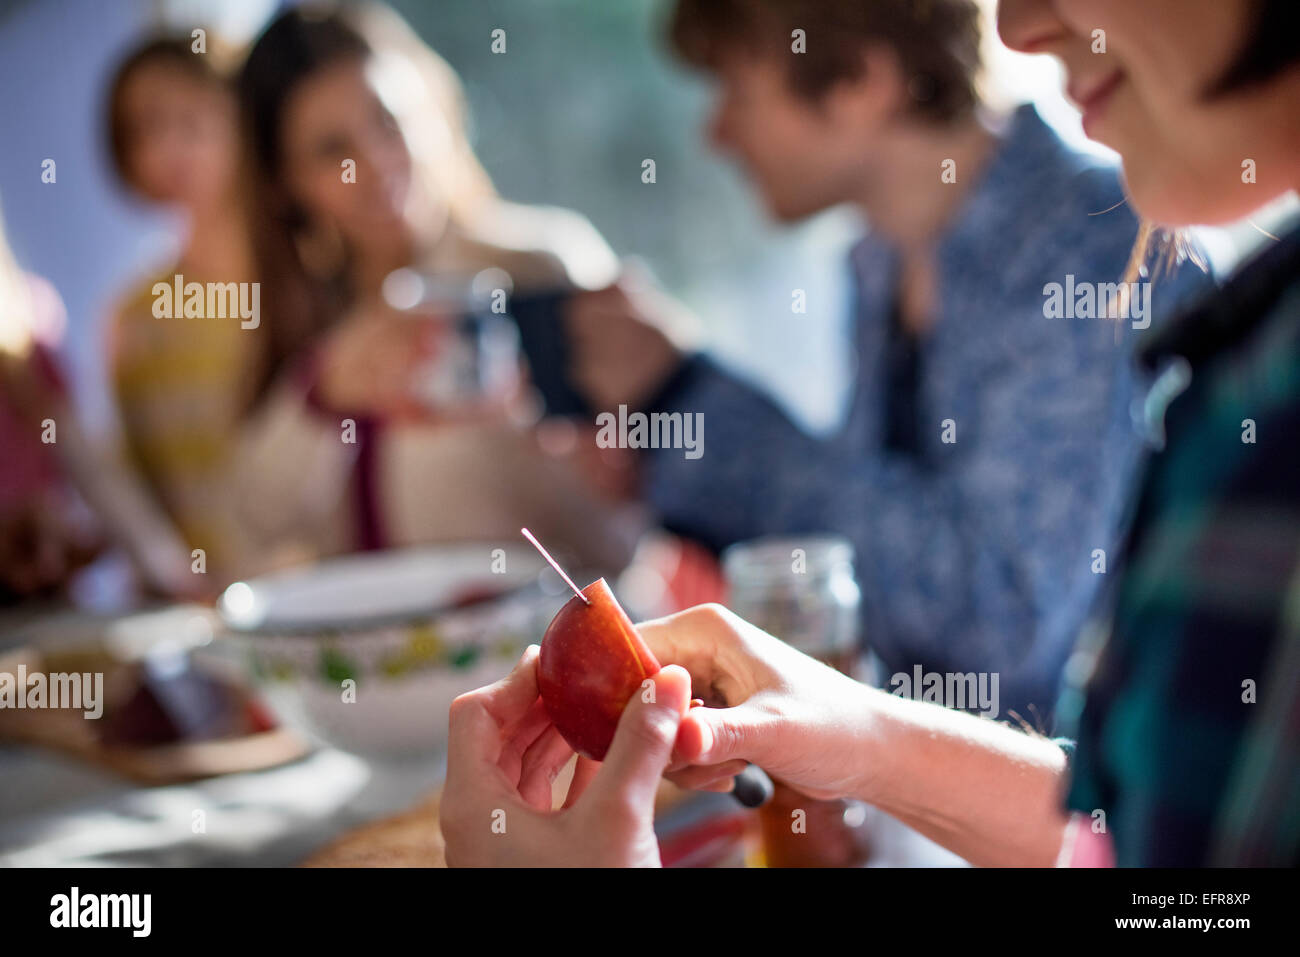 A group of people sitting at a table, eating and chatting. A woman slicing an apple. Stock Photo